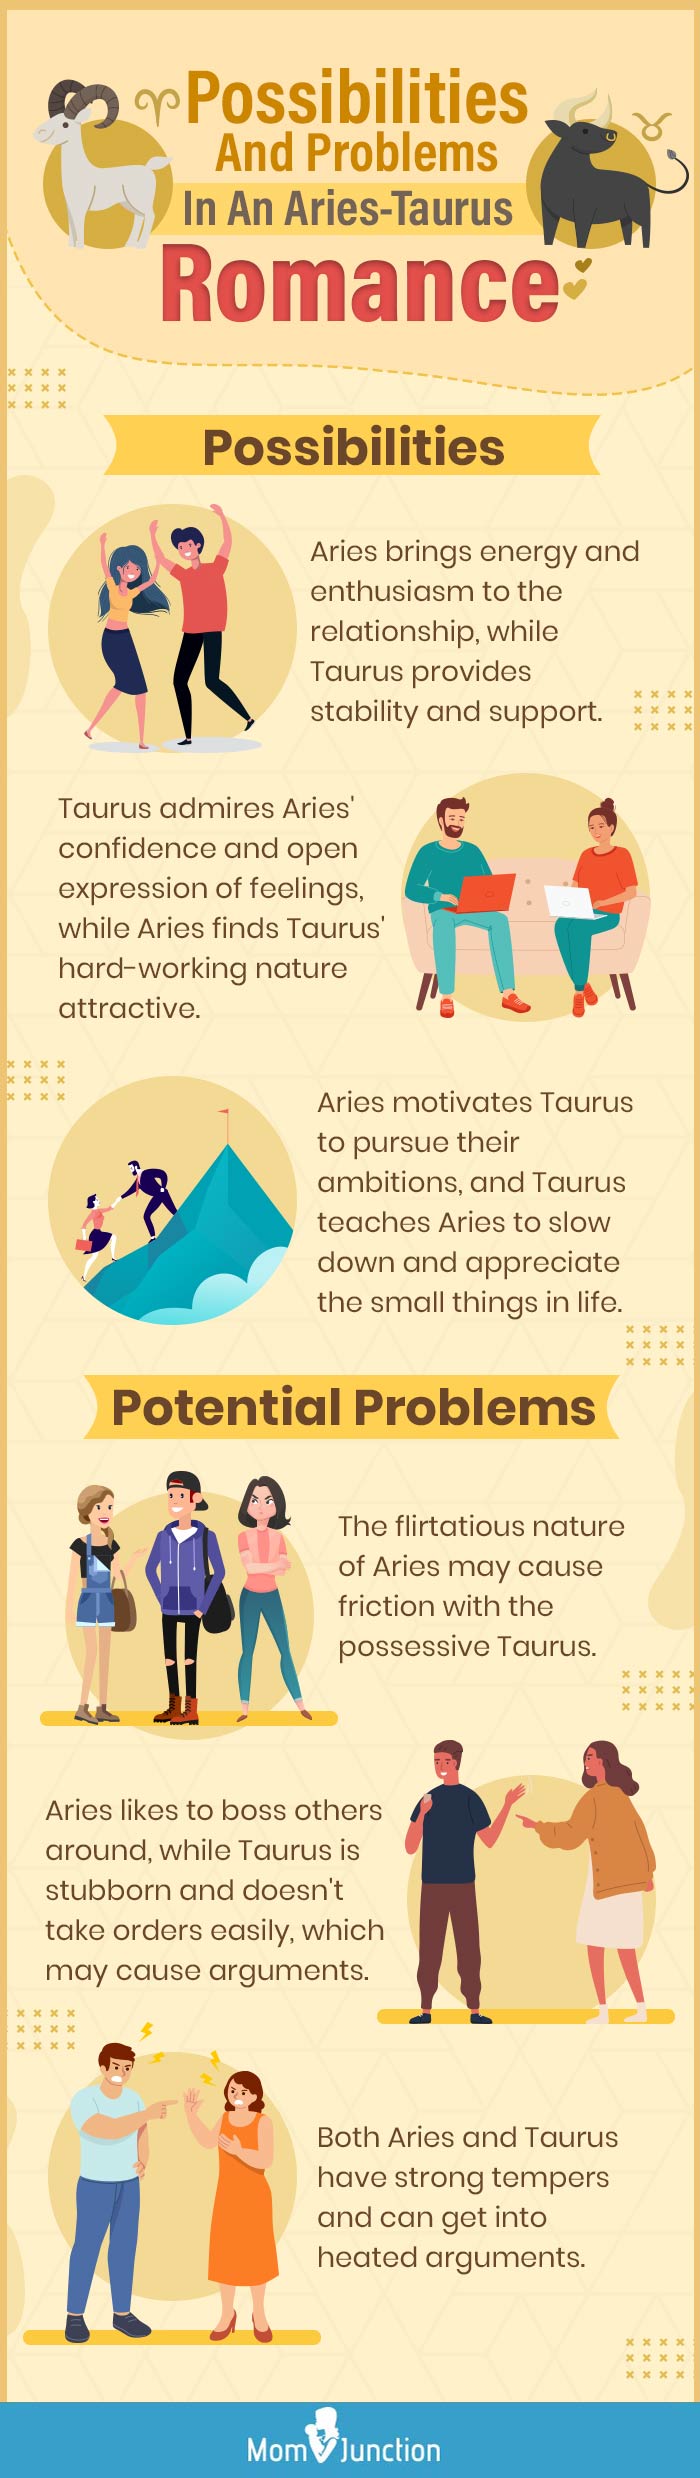 Possibilities And Problems In An Aries Taurus Romance 